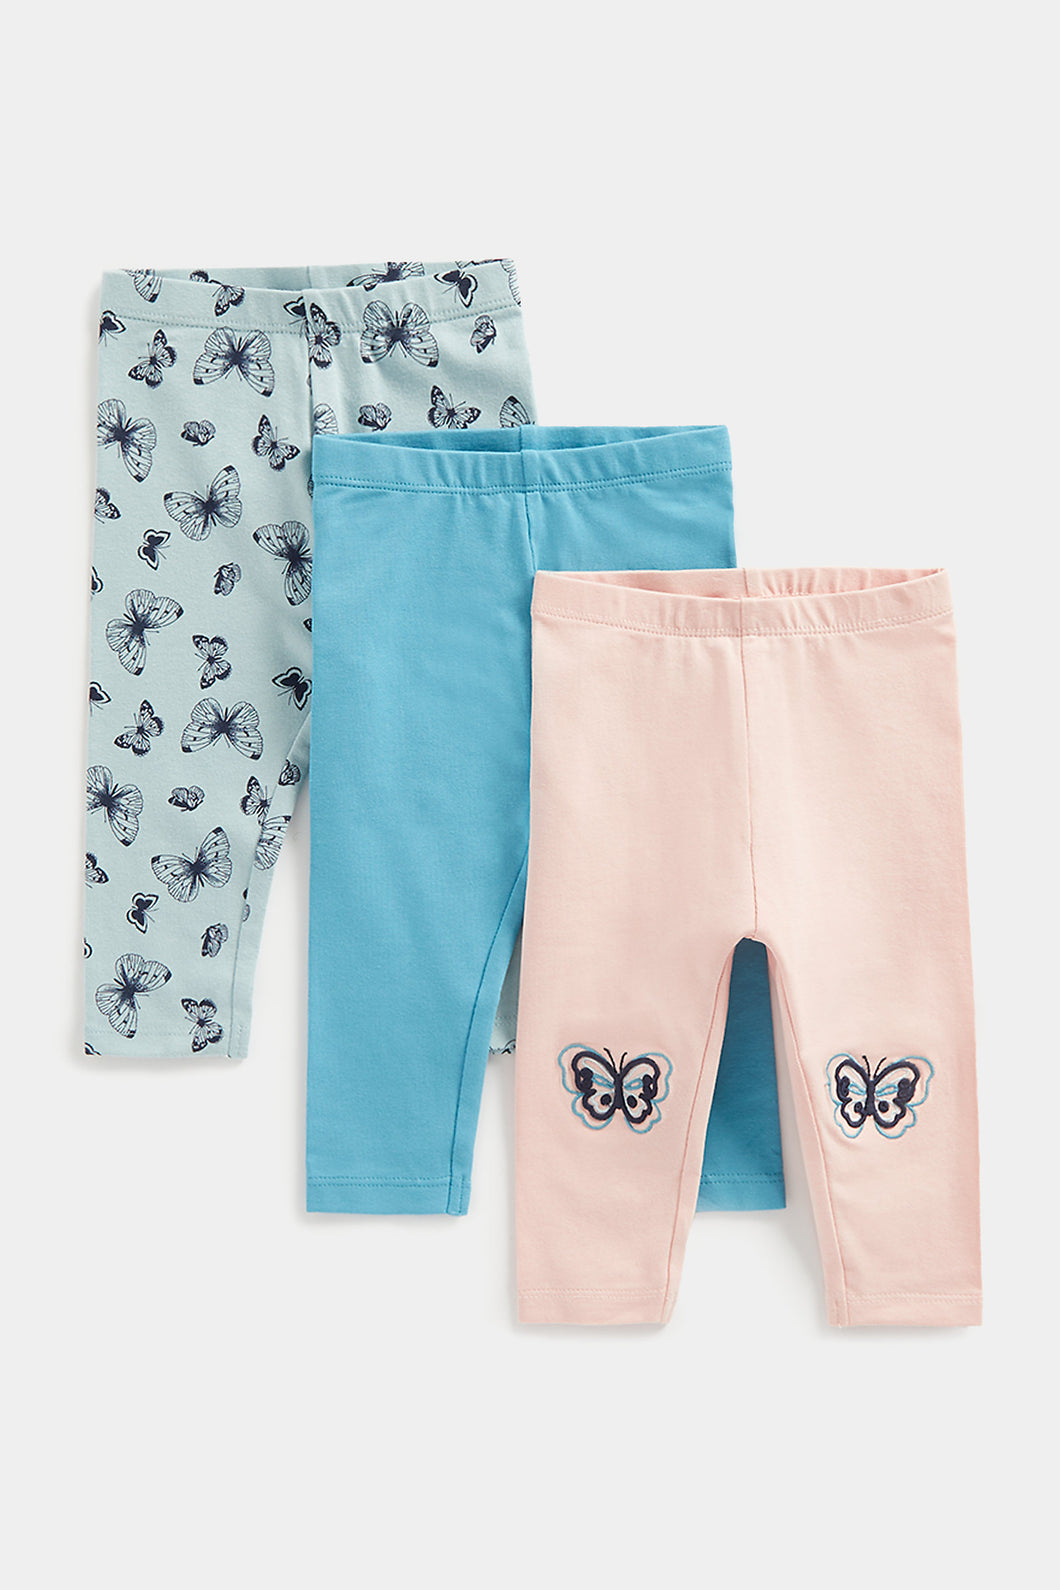 Mothercare Butterfly Leggings - 3 Pack